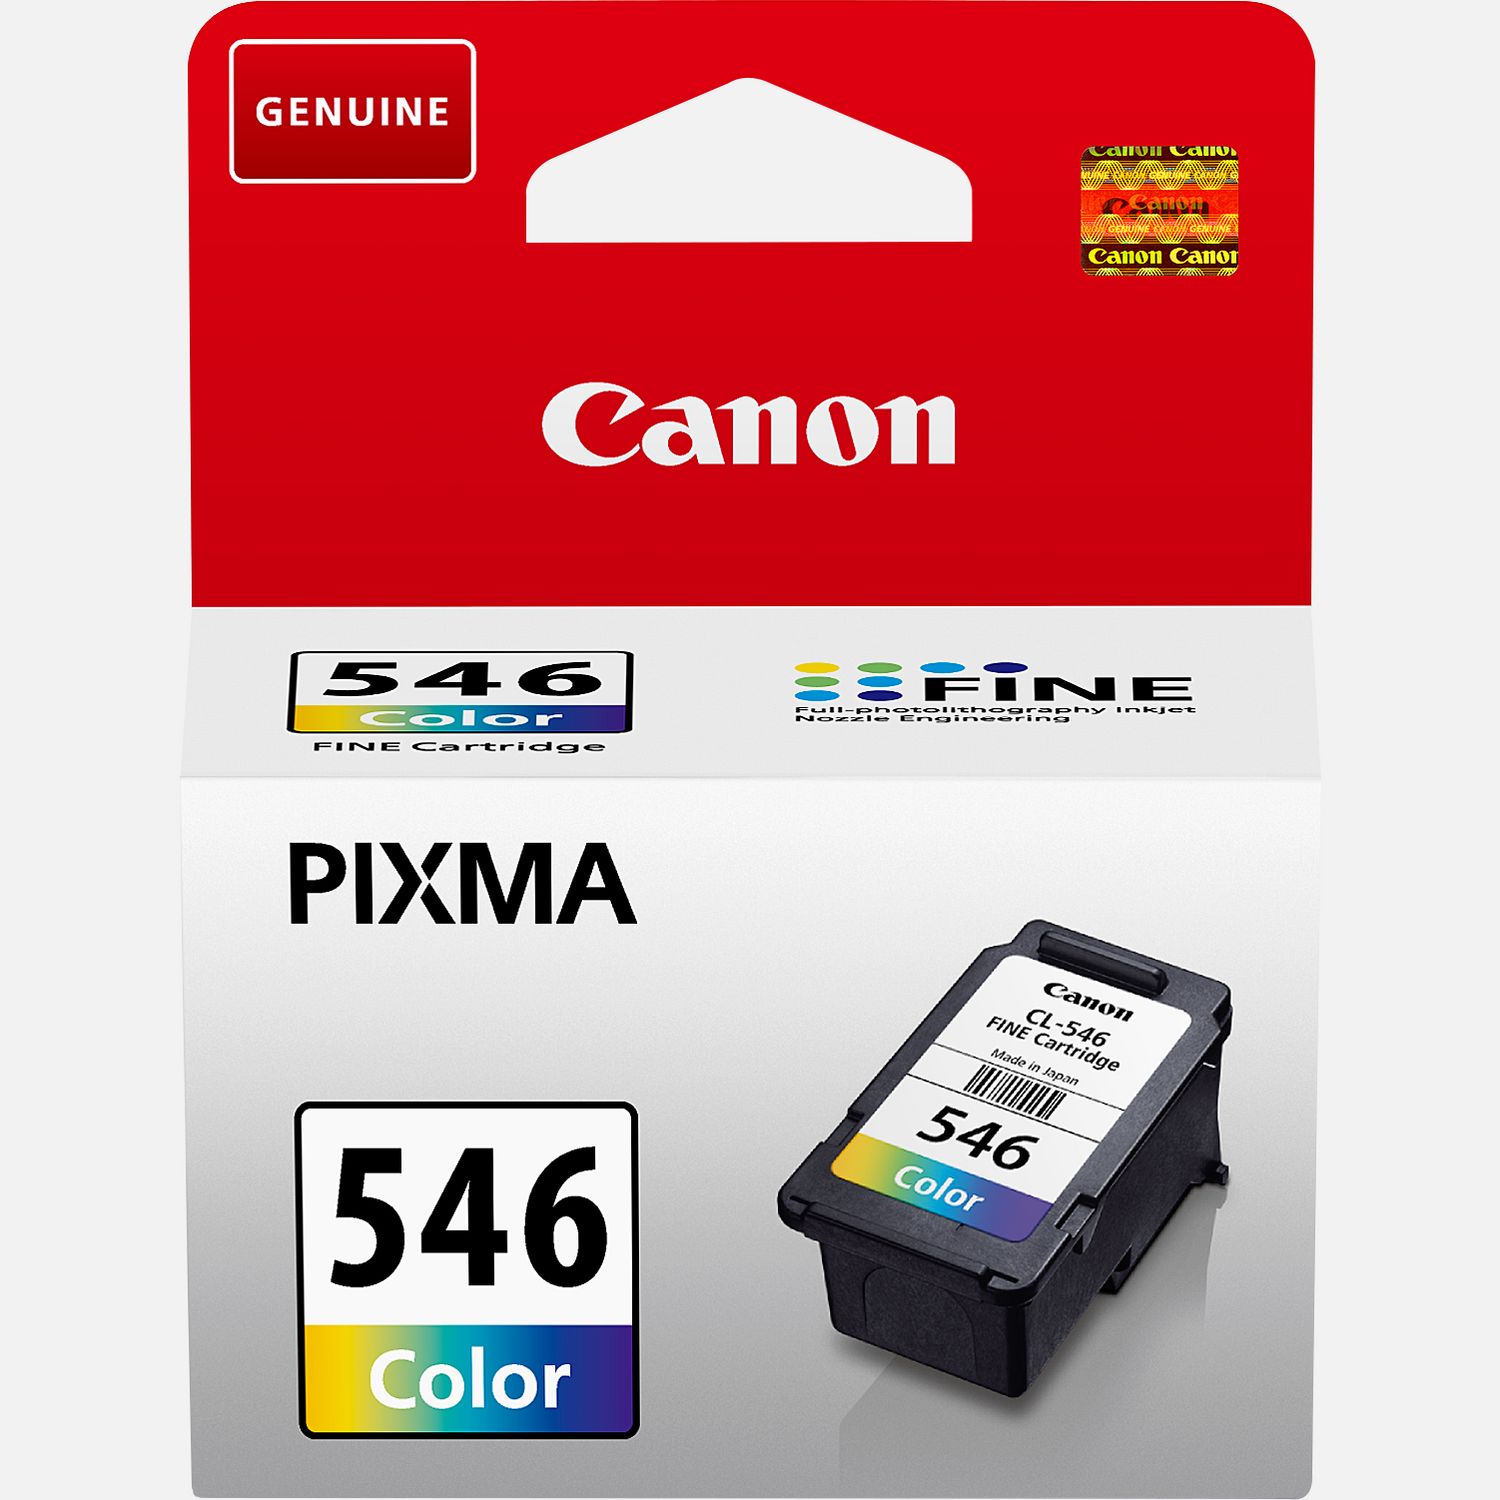 Canon Pixma TS3450/TS3351: How to Replace/Change Ink Cartridges